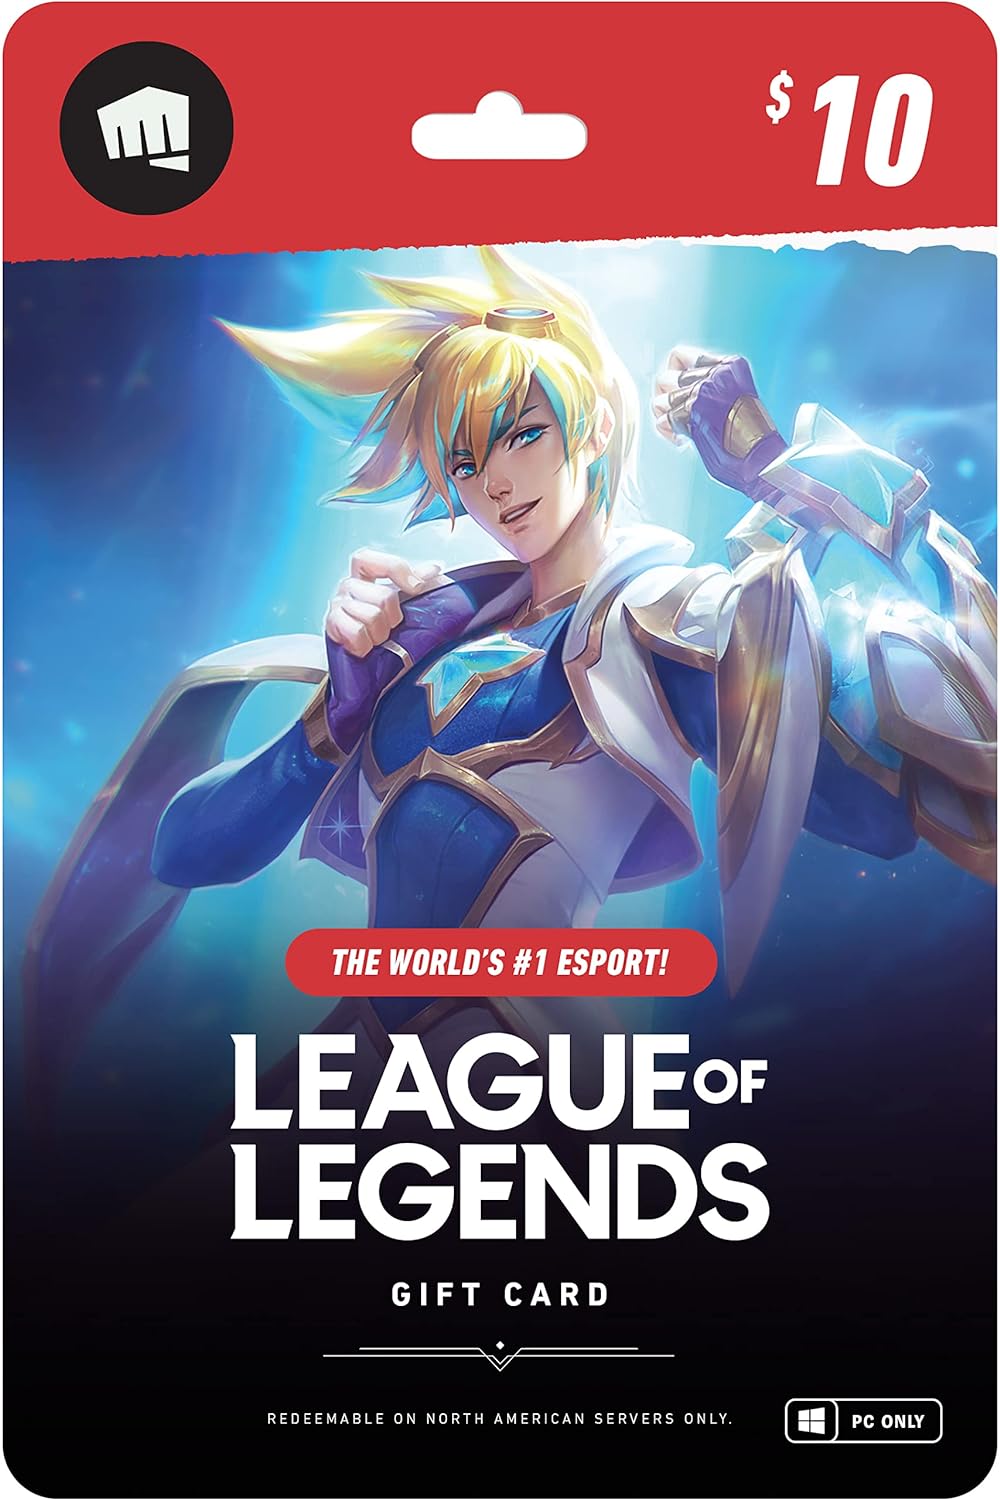 League of Legends $10 Gift Card